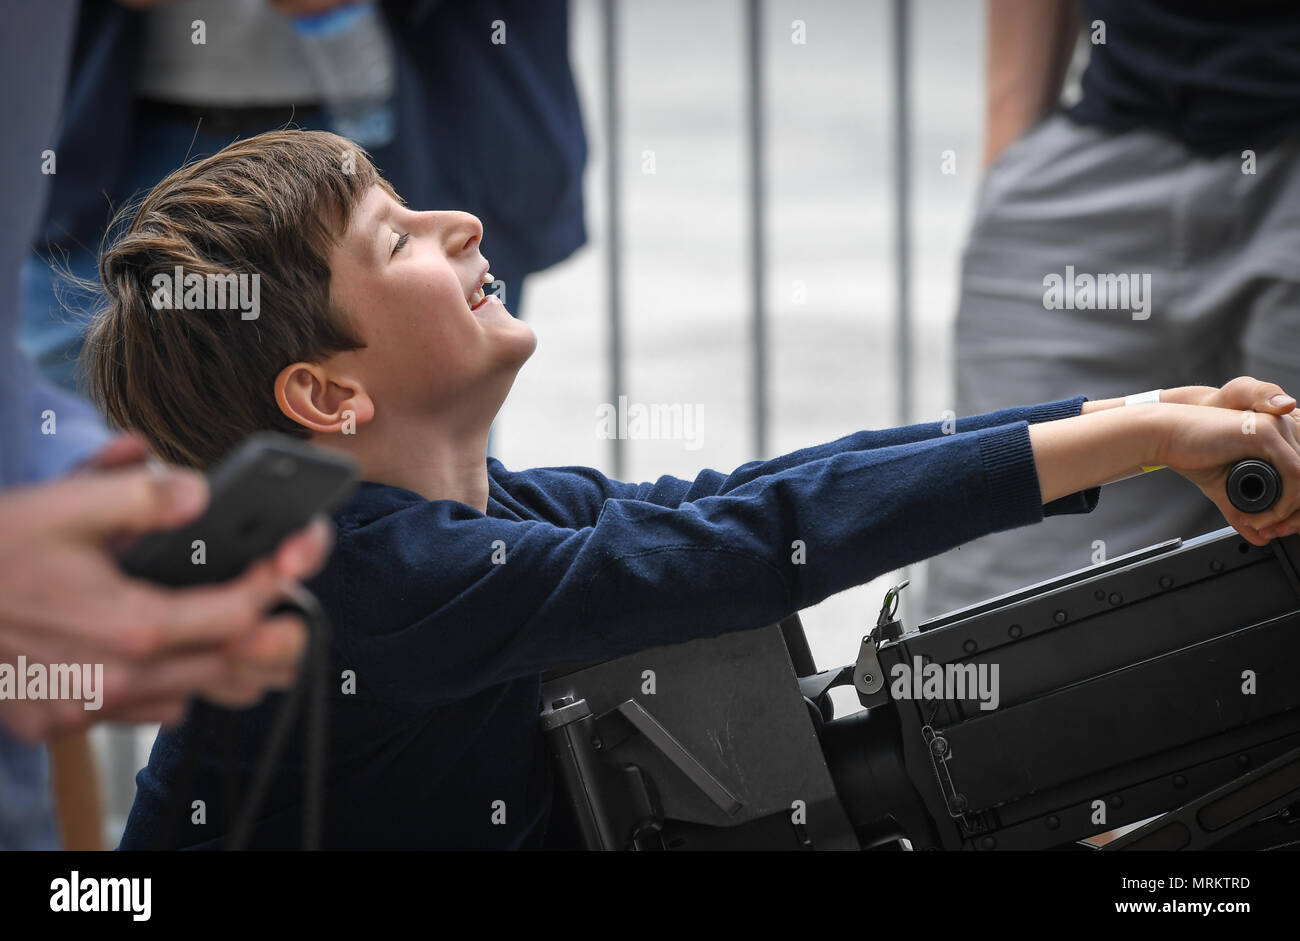 A child struggles to rack a machine gun attached to a CV-22 Osprey from Royal Air Force Mildenhall, England, at Le Bourget Airport, France, during the Paris Air Show, June 23, 2017. The Paris Air Show offers the U.S. a unique opportunity to showcase their leadership in aerospace technology to an international audience. By participating, the U.S. hopes to promote standardization and interoperability of equipment with their NATO allies and international partners. This year marks the 52nd Paris Air Show and the event features more than 100 aircraft from around the world. (U.S. Air Force photo/ Te Stock Photo